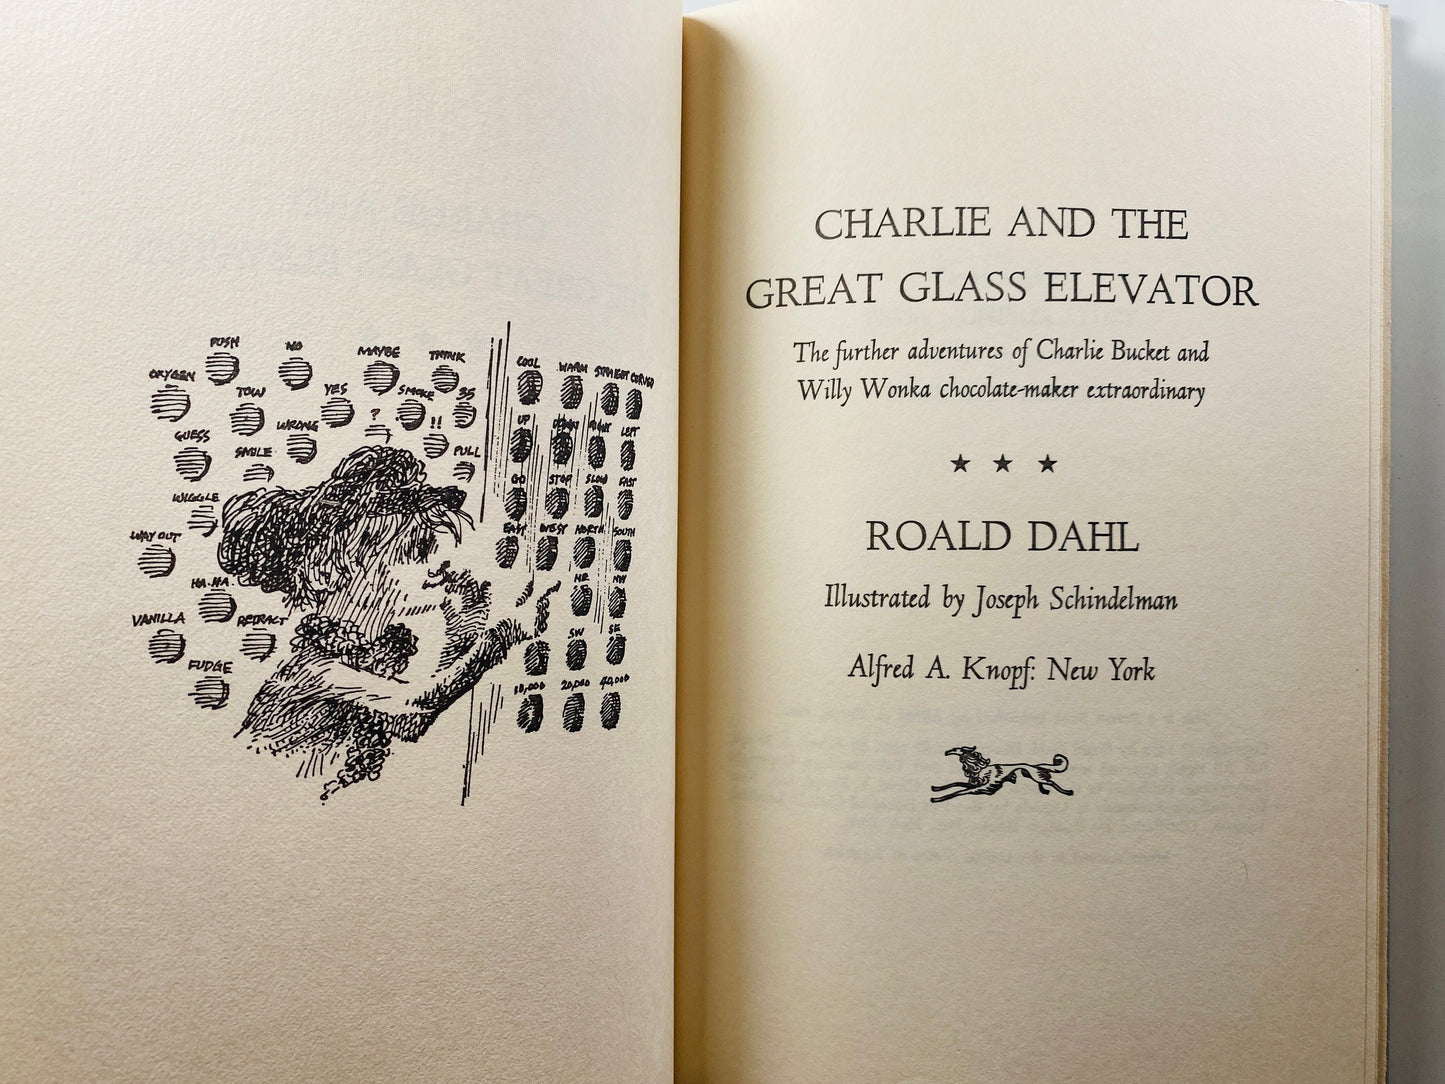 Charlie and the Great Glass Elevator by Roald Dahl. EARLY PRINTING vintage book circa 1972 Collector gift!